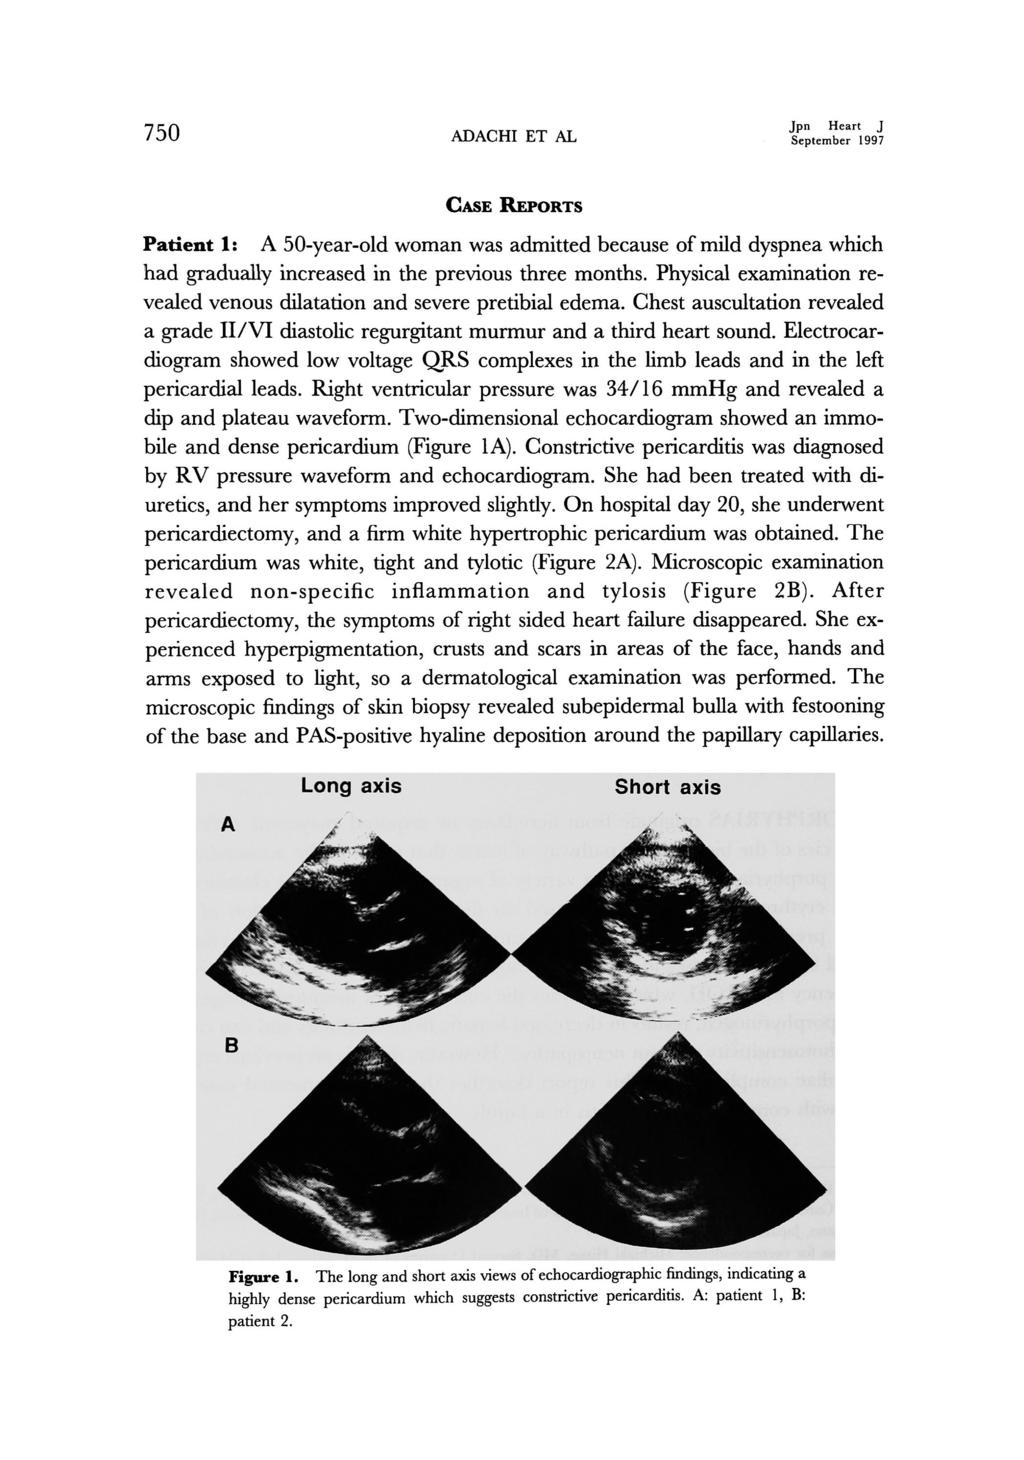 750 ADACHI ET AL Jpn Heart J September 1997 CASE REPORTS Patient 1: A 50-year-old woman was admitted because of mild dyspnea which had gradually increased in the previous three months.